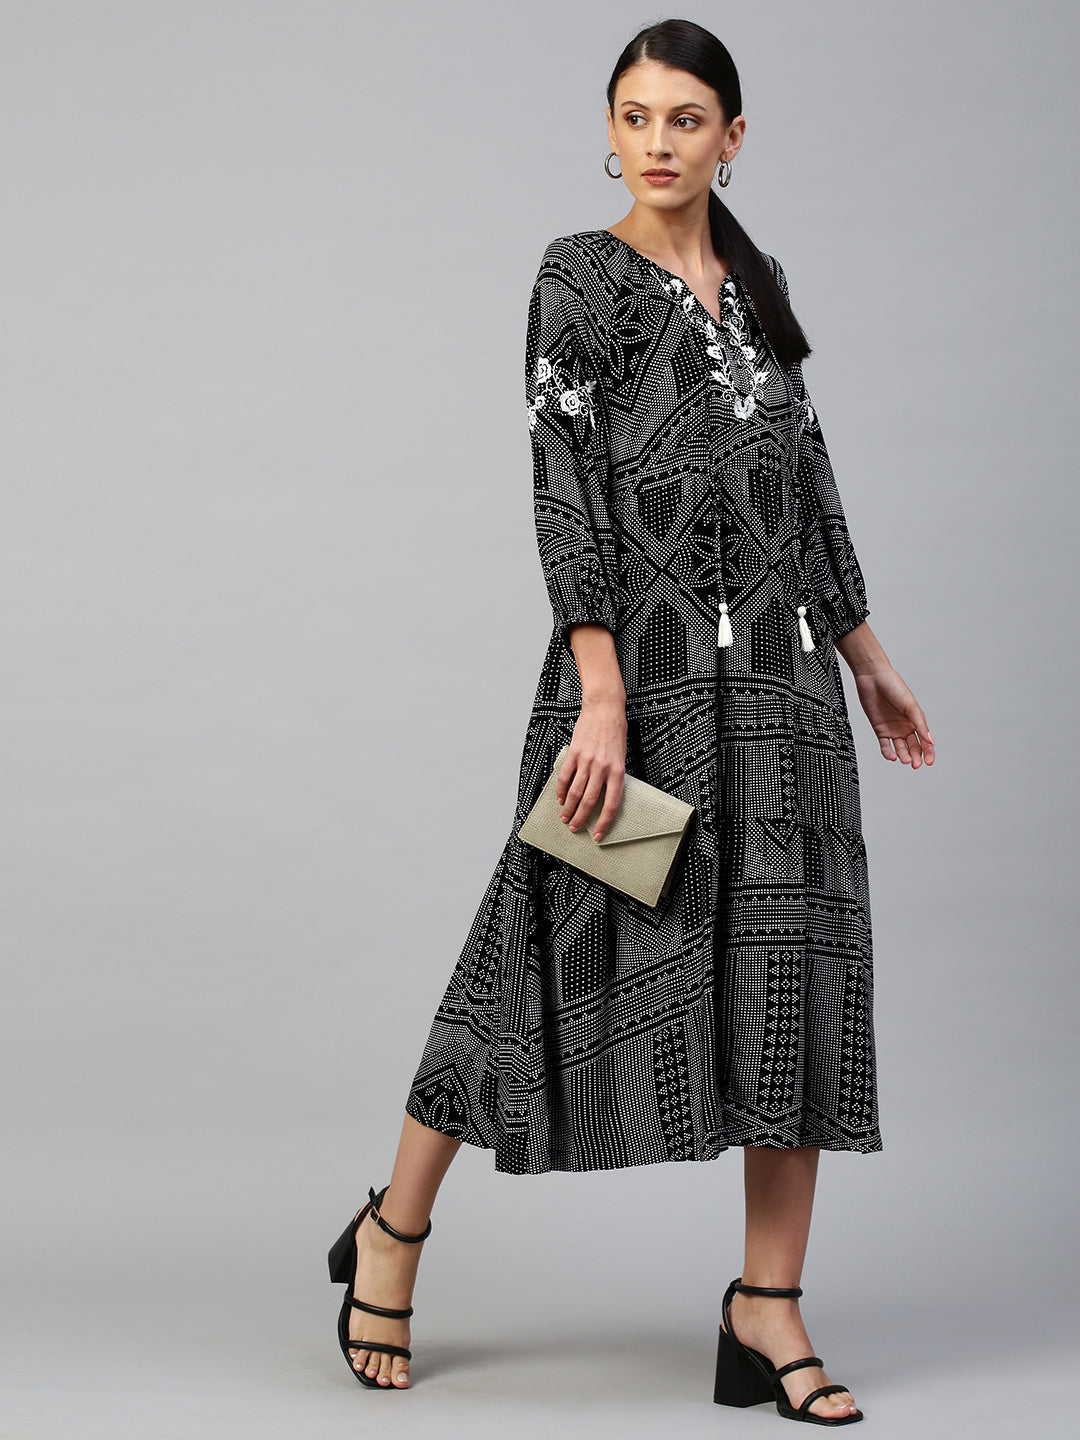 Graphic Printed Rayon Tiered Dress With Contrast Embroidery